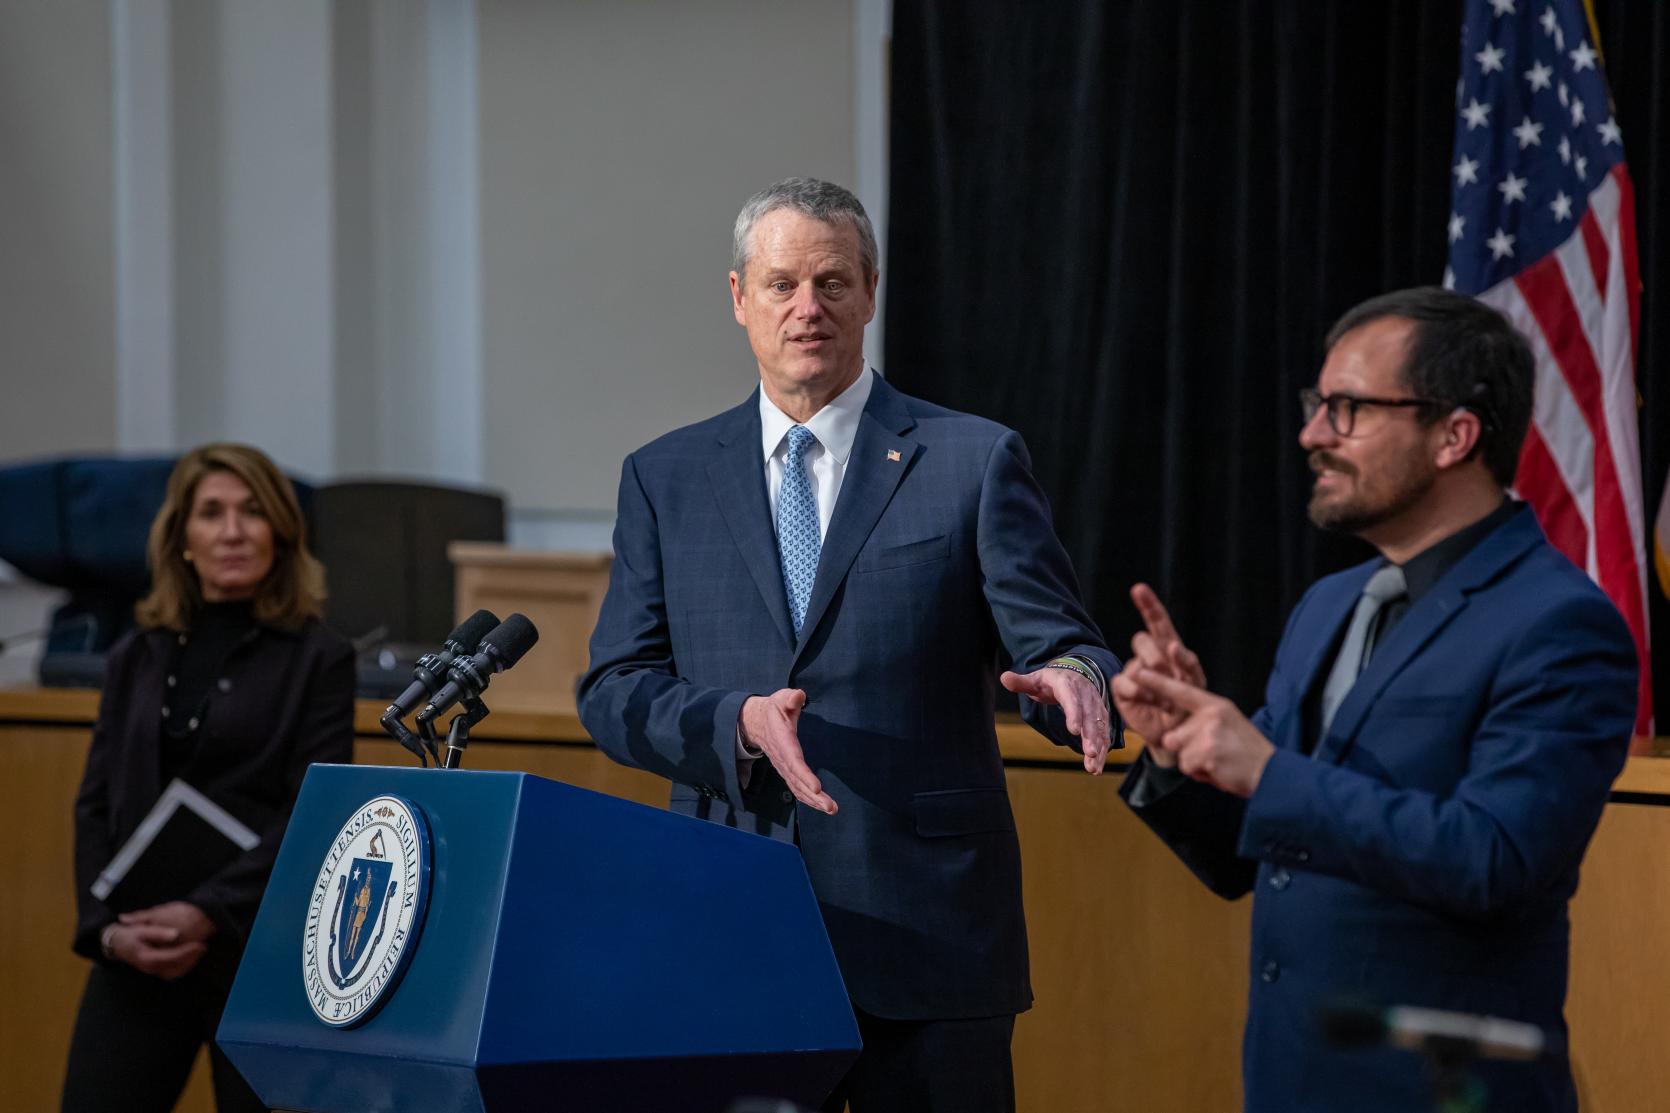 Baker-Polito Administration Announces Four-Phase Approach to Reopening and Publishes Mandatory Workplace Safety Standards